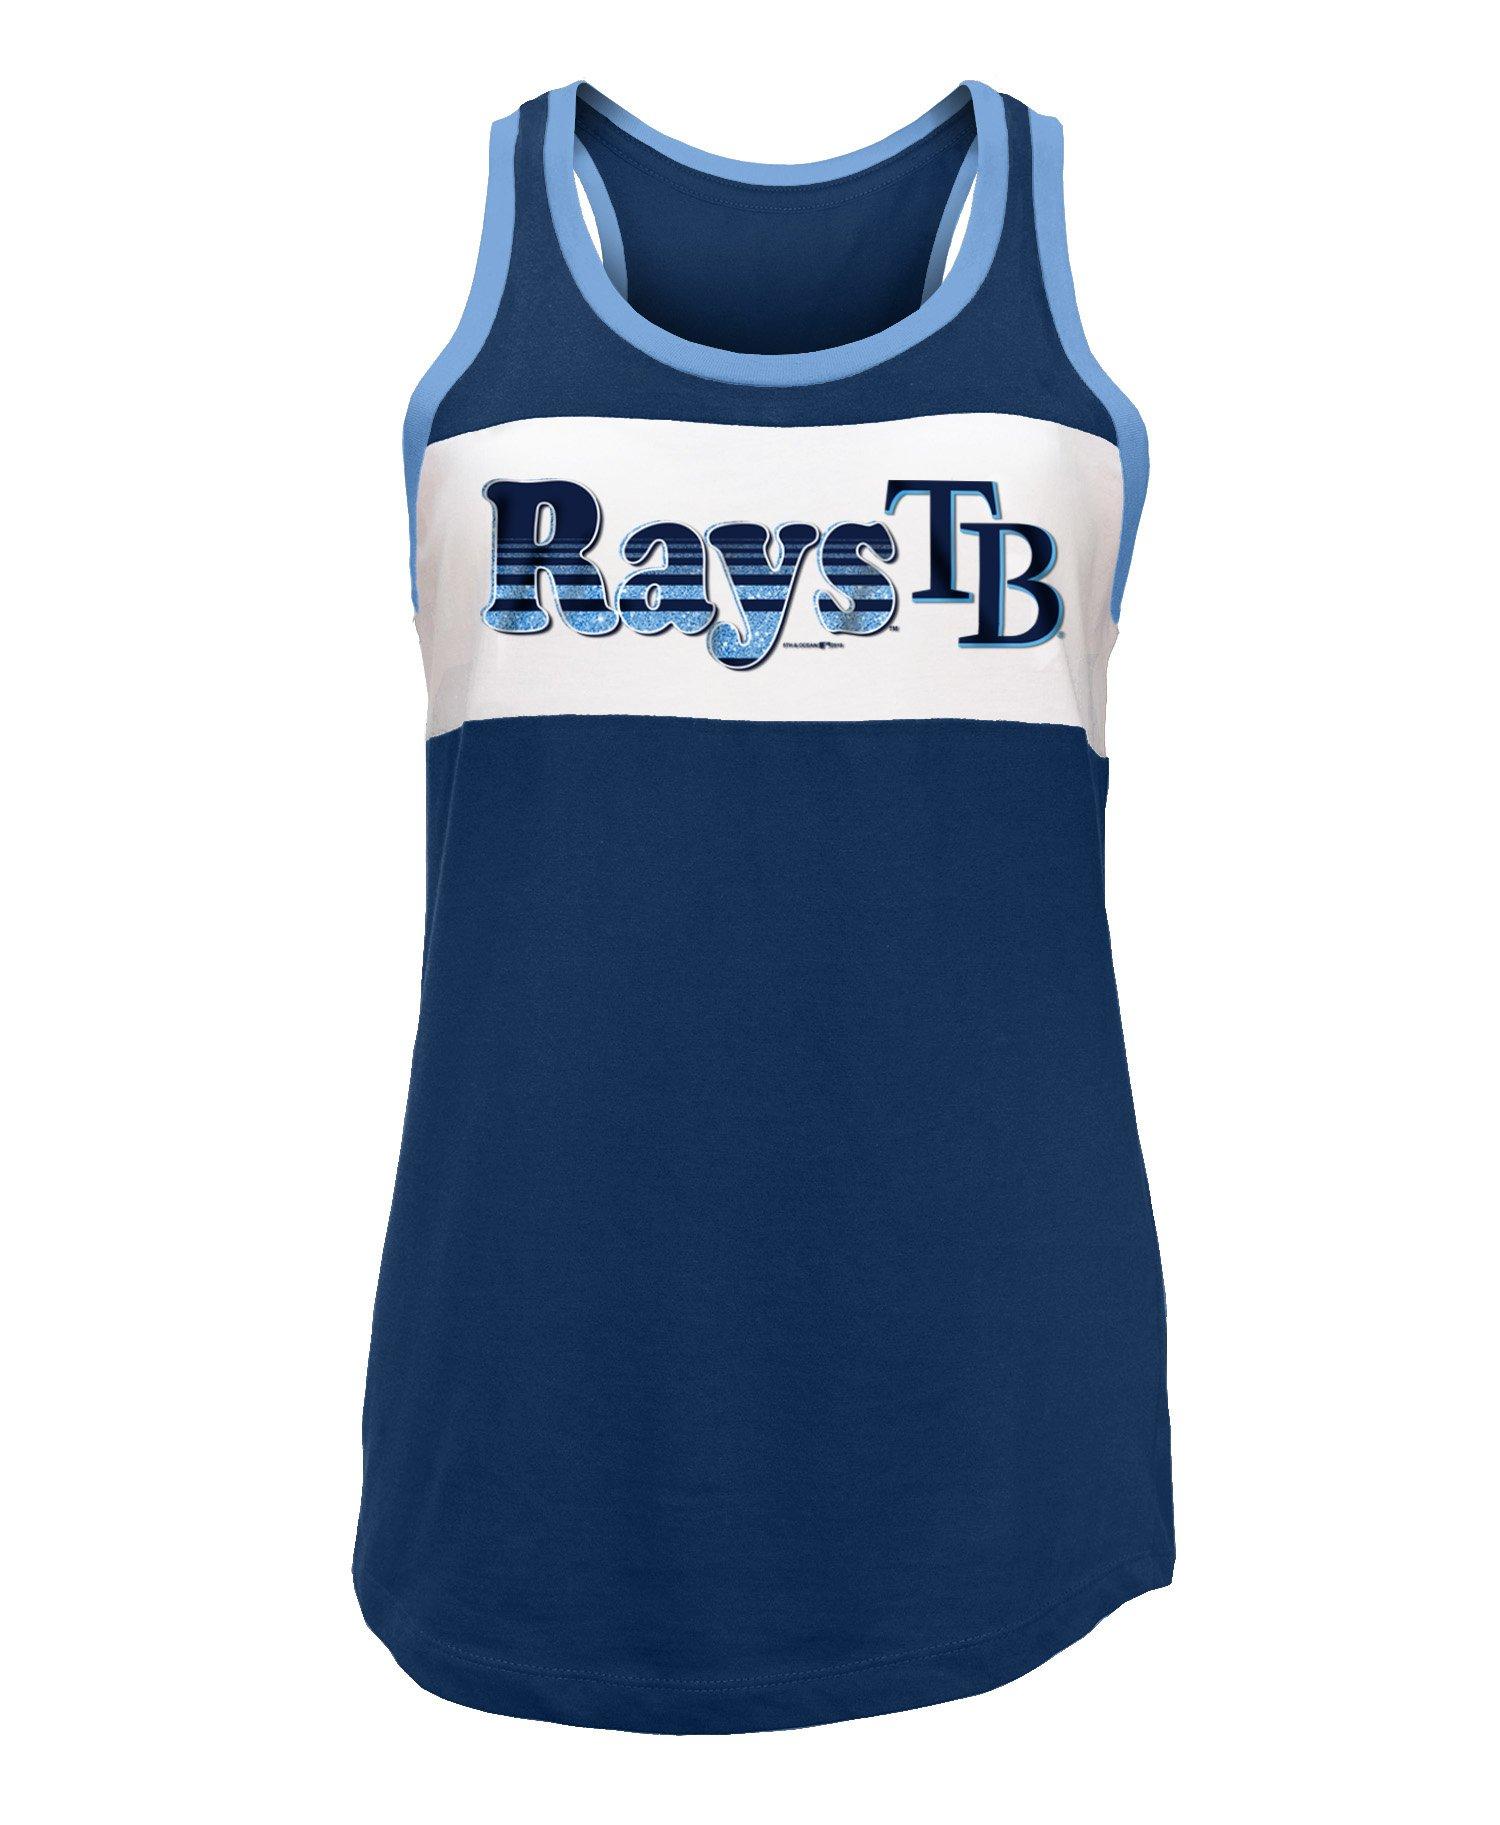 tampa bay rays baby gear